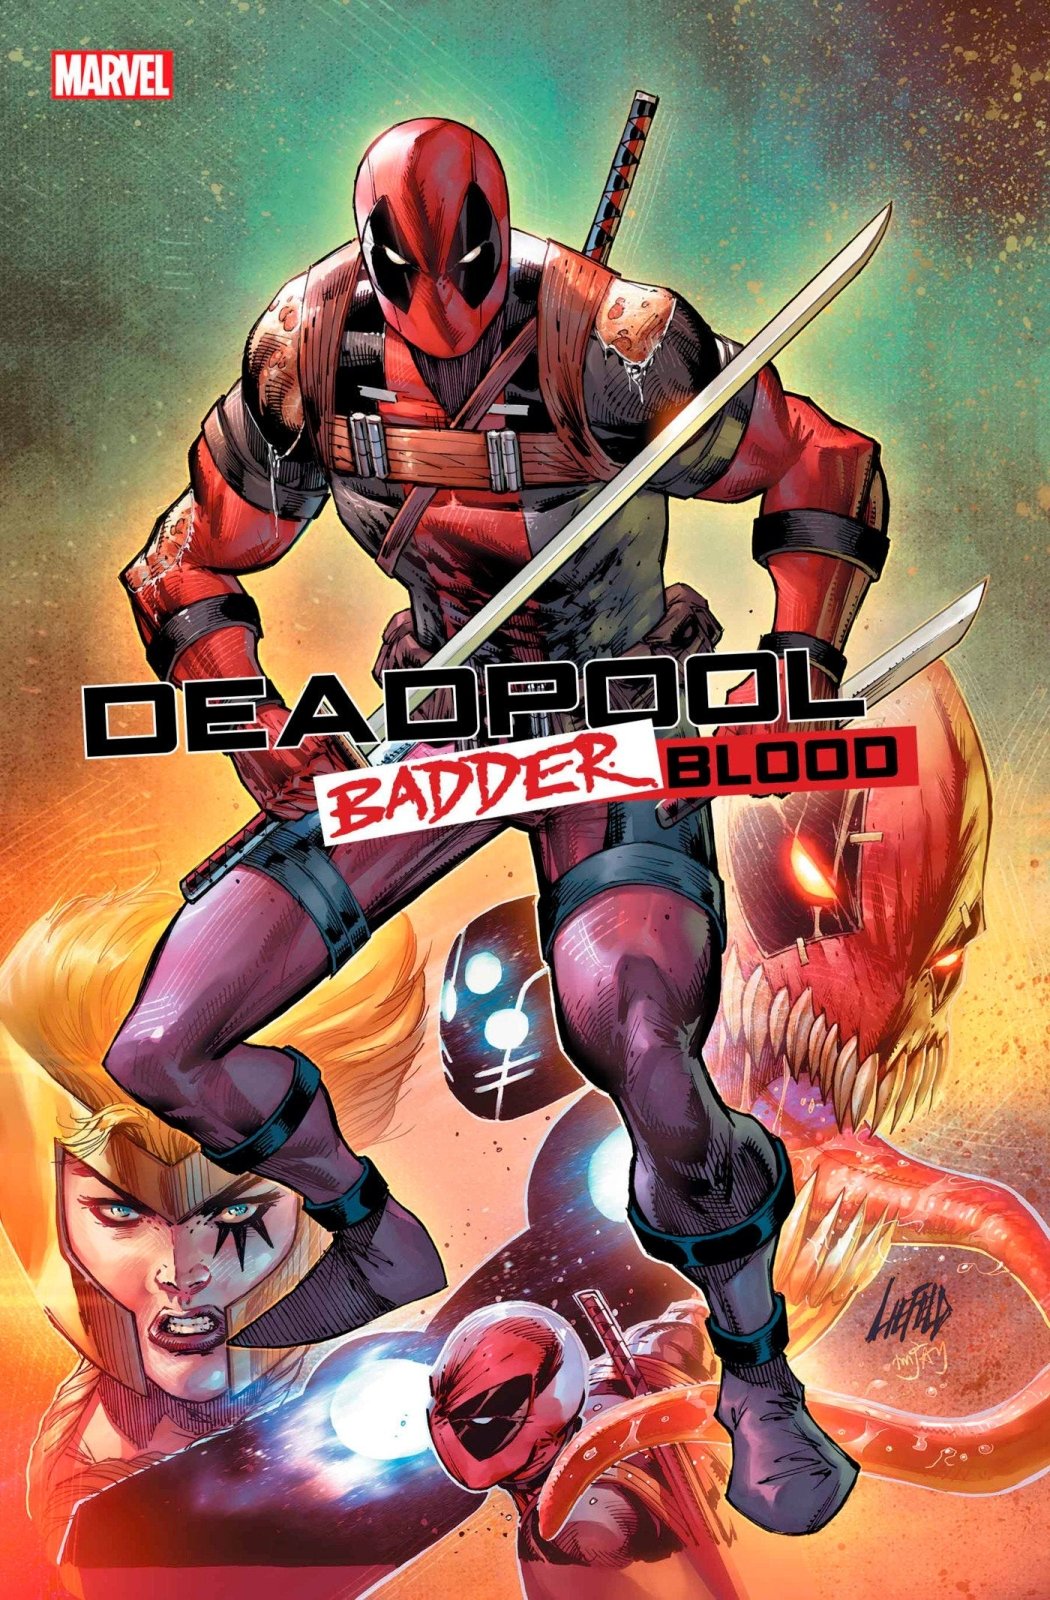 Deadpool: Badder Blood 2 - The Fourth Place